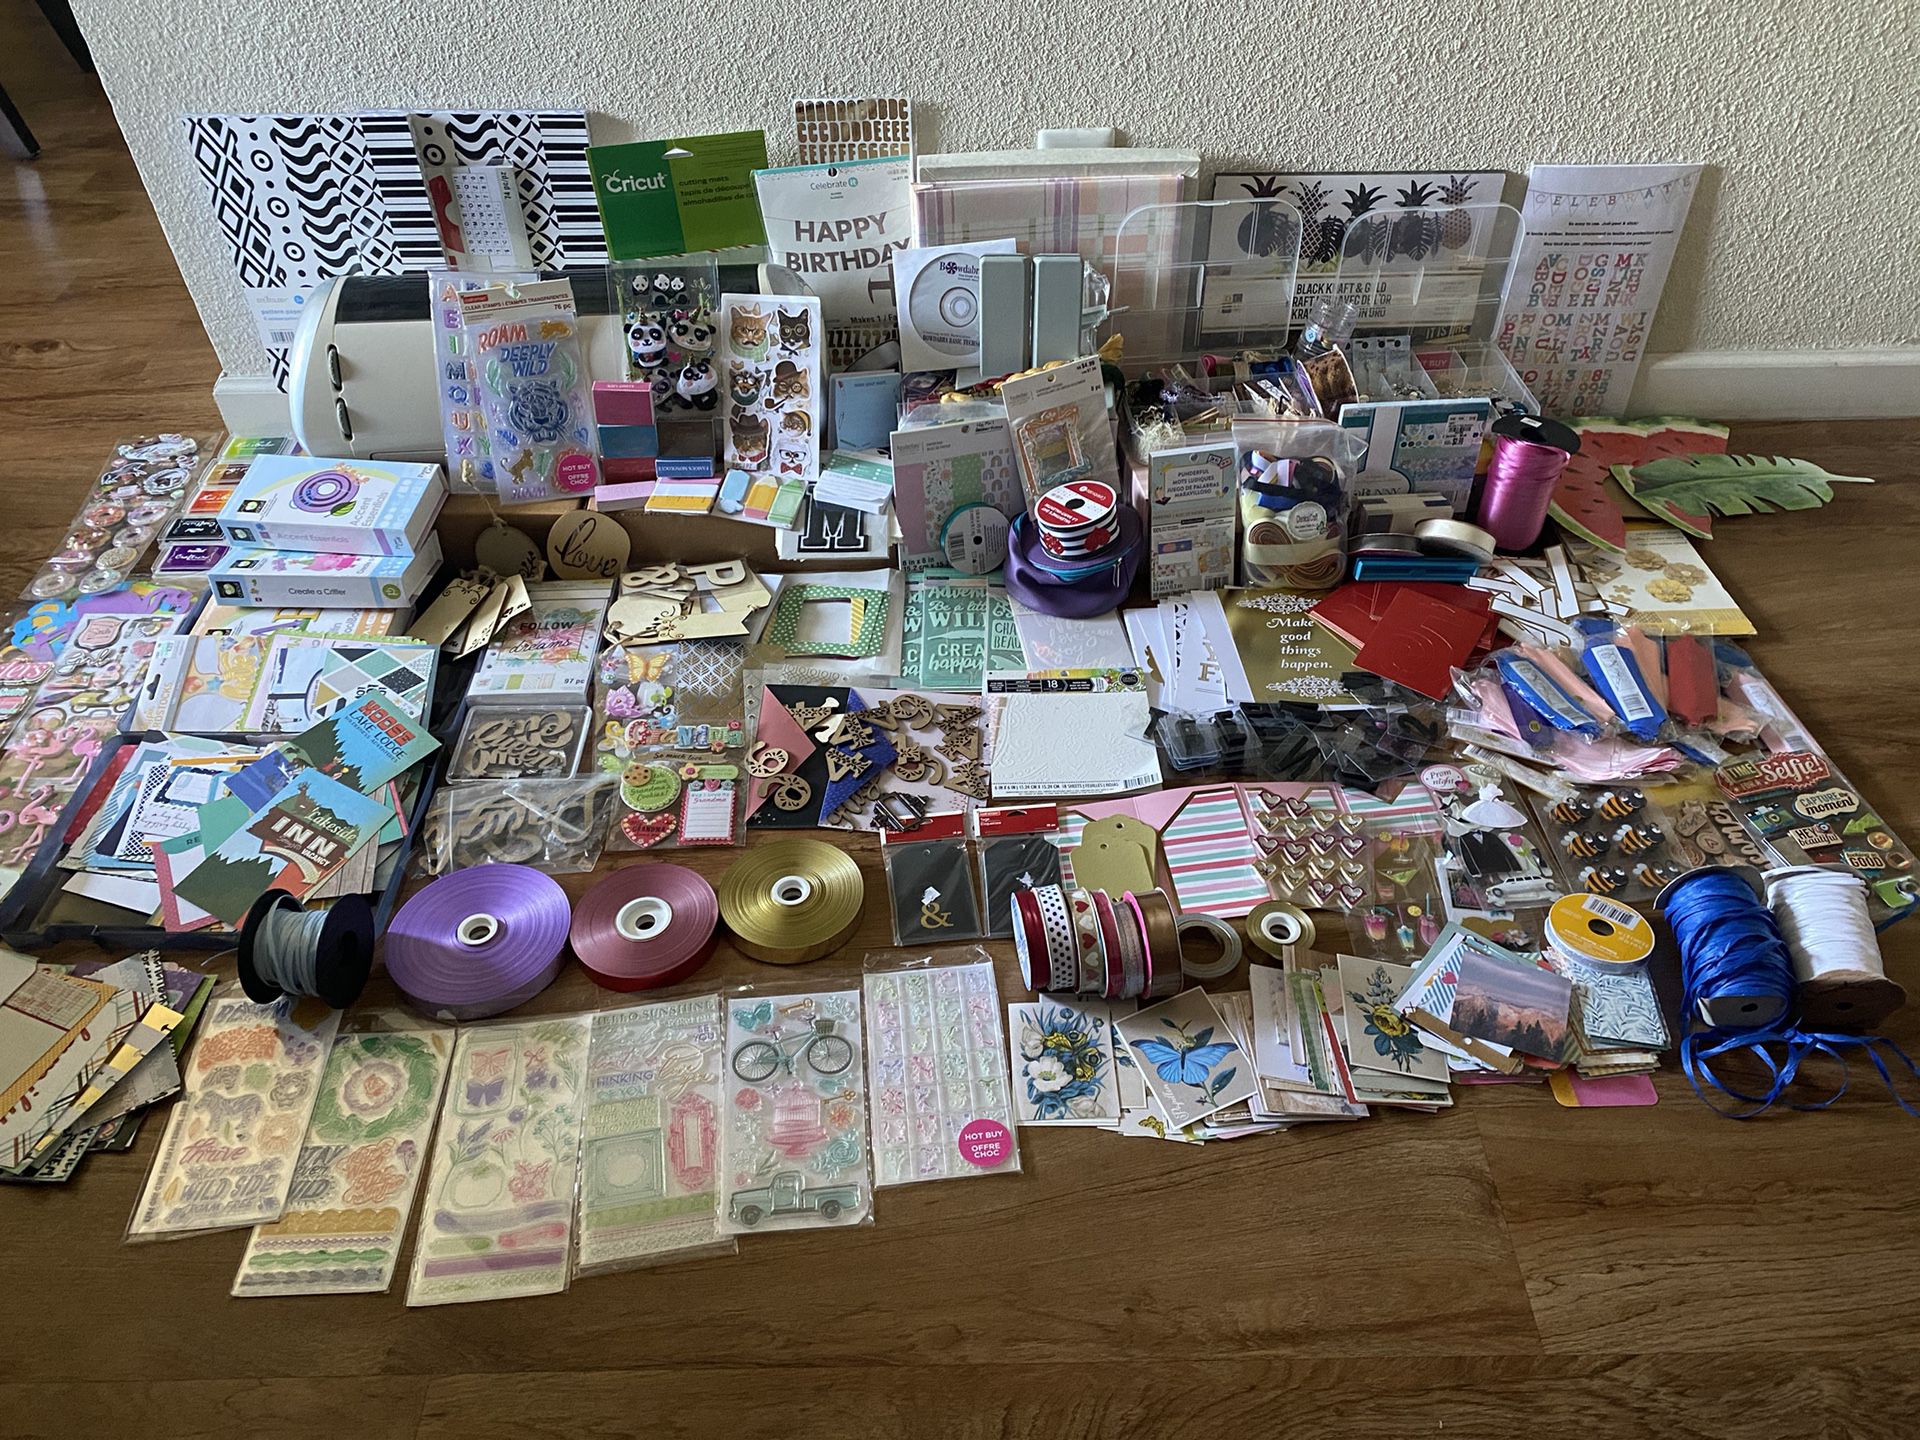 Arts supplies lot|arts and crafts|cricut|stickers|stamps|ribbons|papers|pads